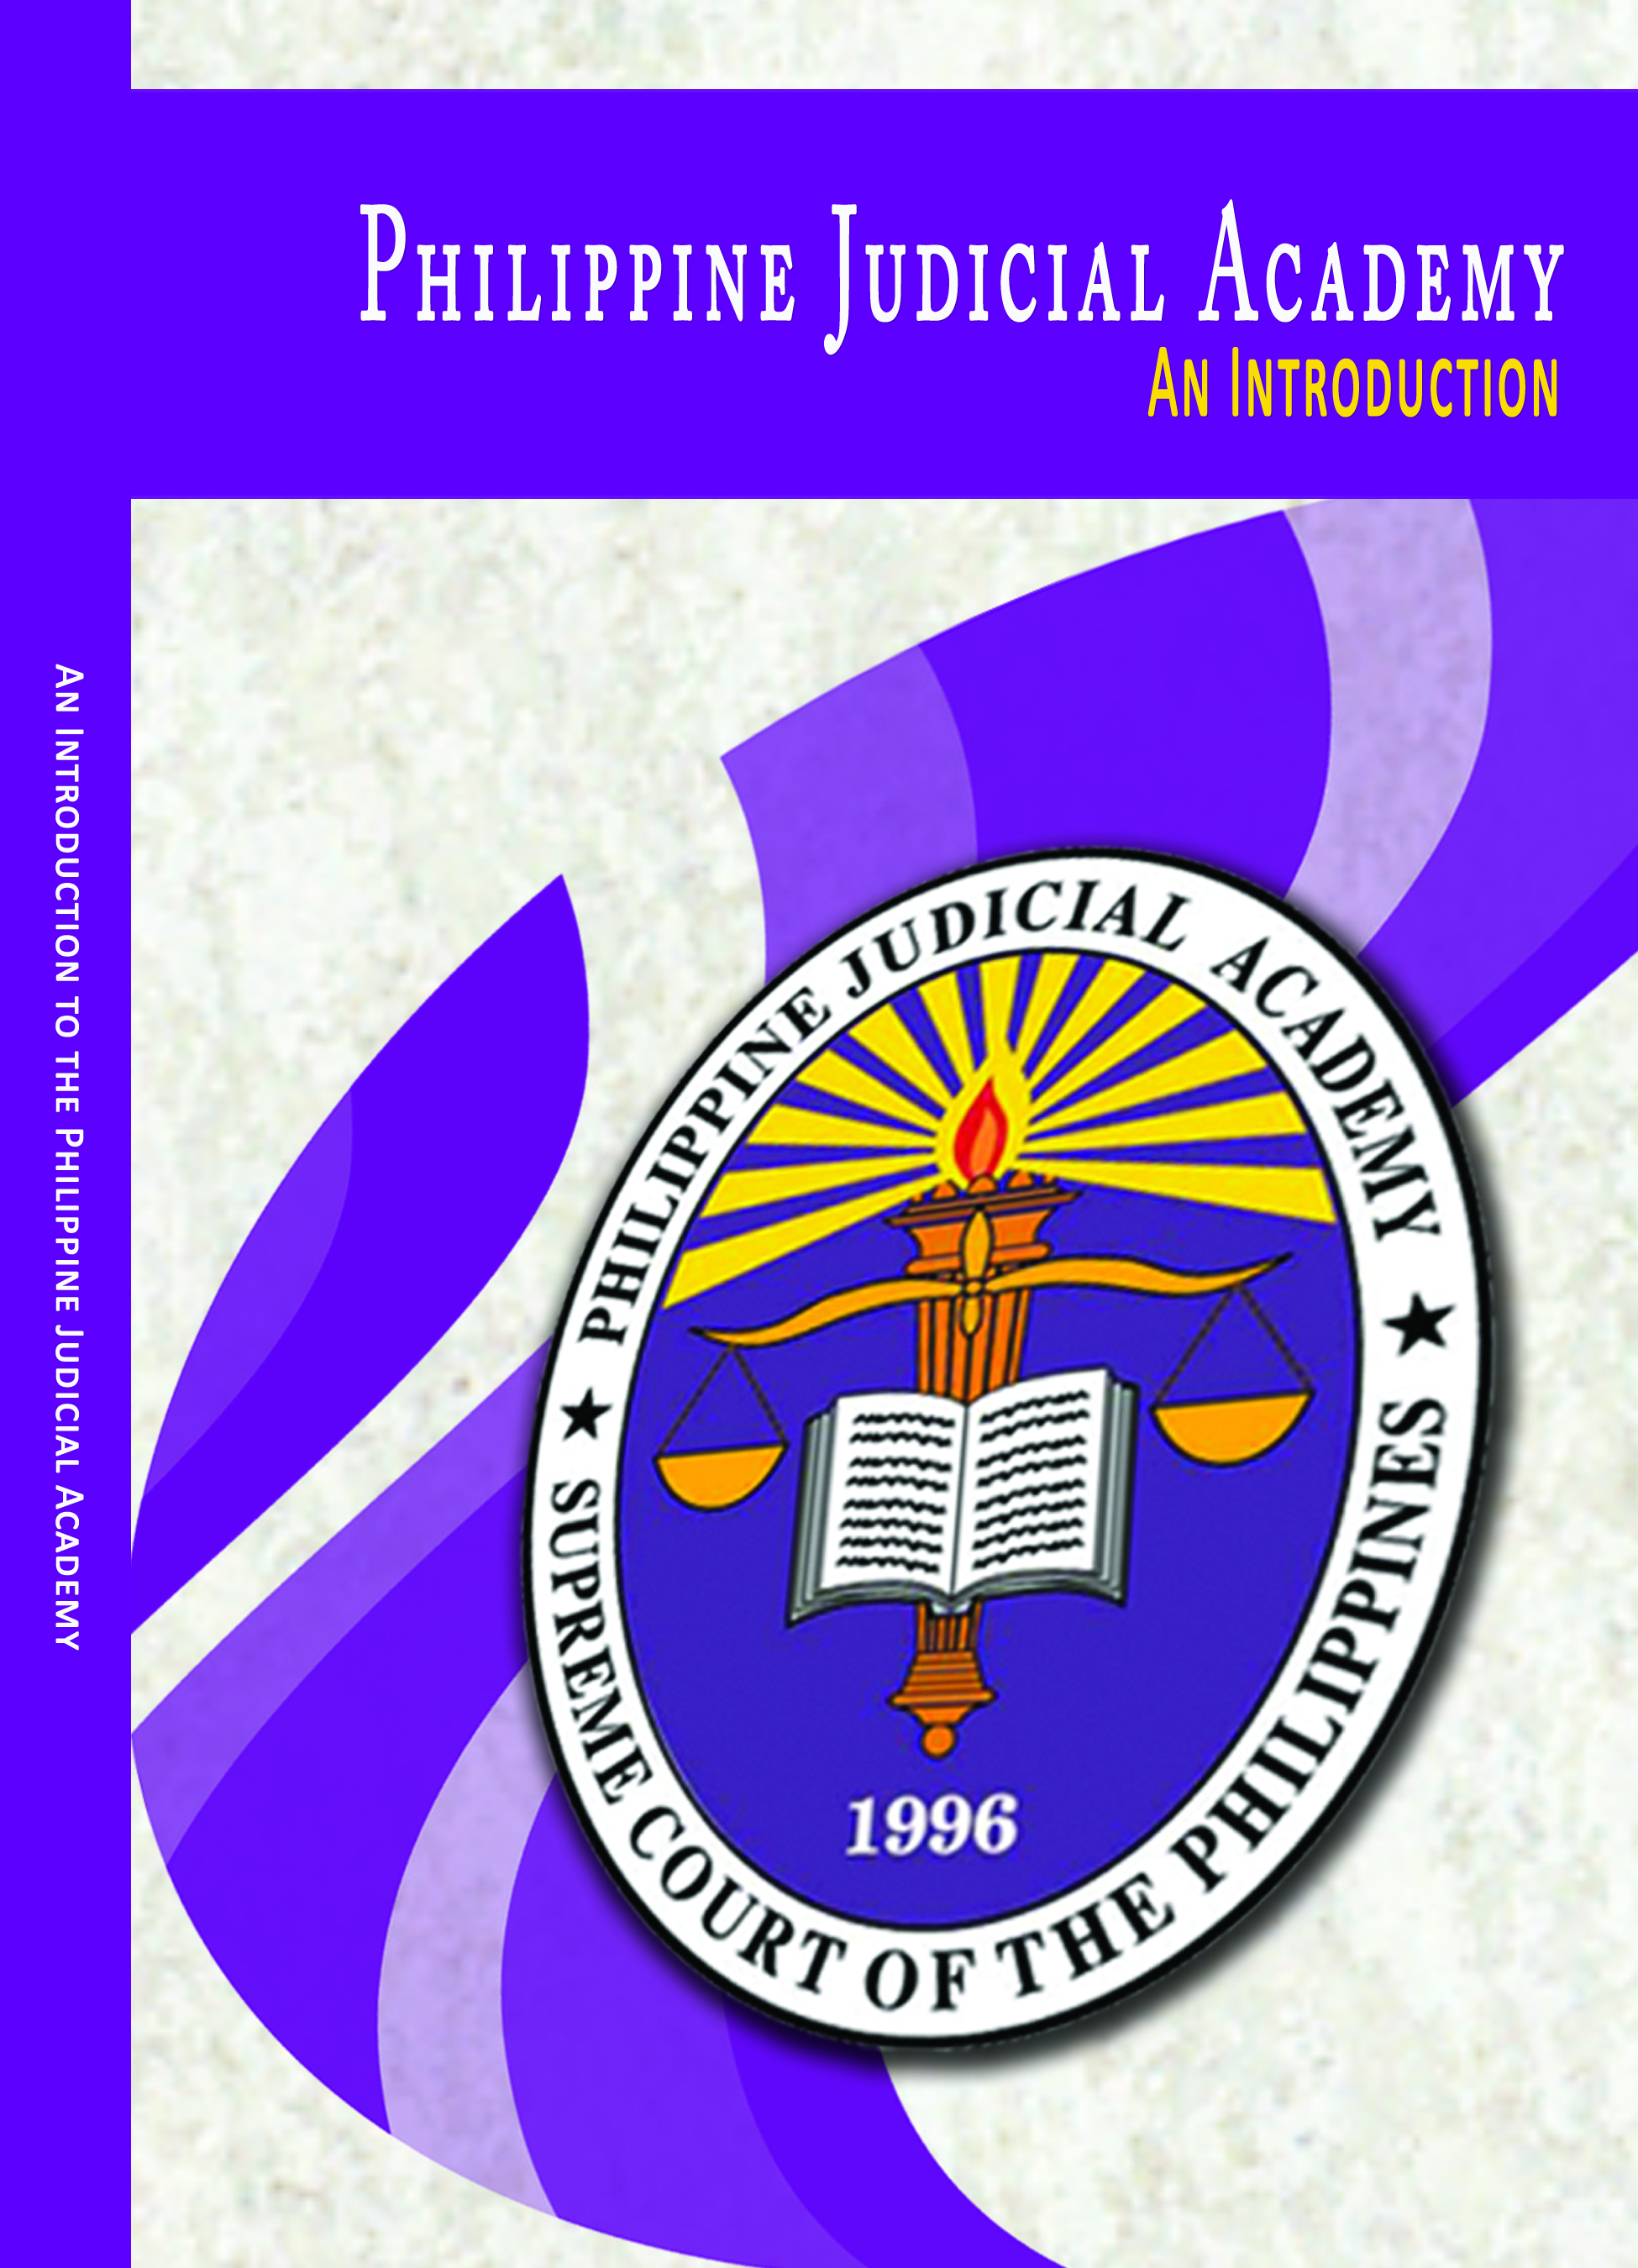 An Introduction to the Philippine Judicial Academy